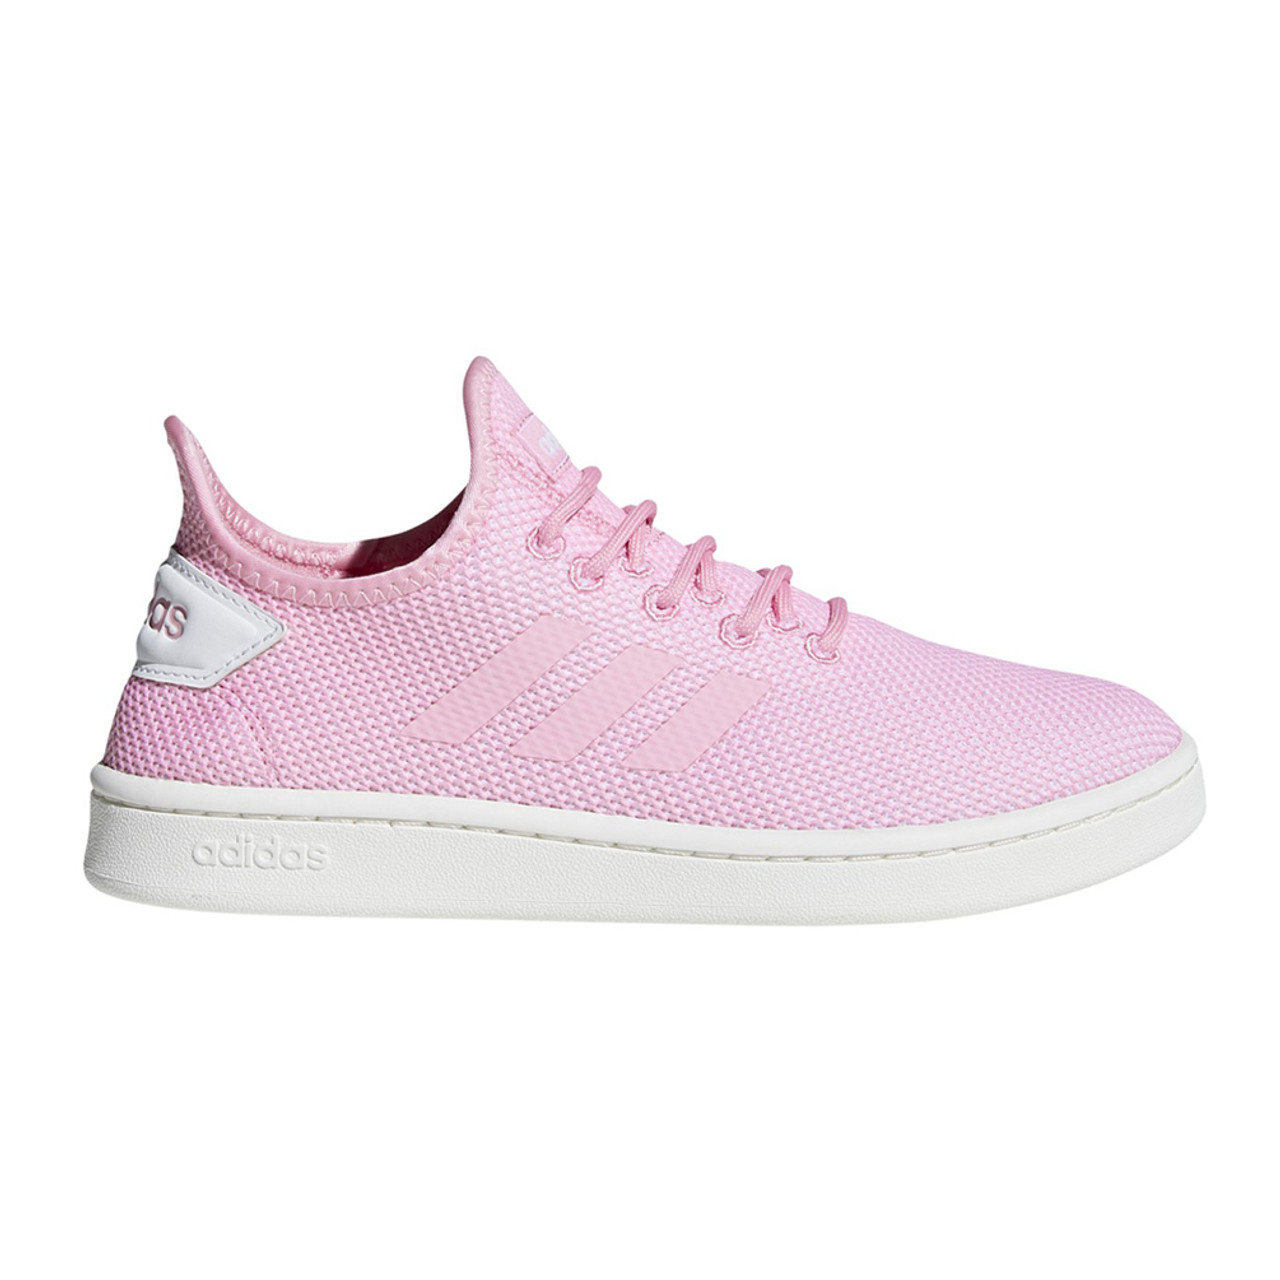 New Adidas Women's Court Adapt Tennis Sneaker True Pink/White  - True  Pink/White | Discount Adidas Ladies Athletic Shoe & More  |  